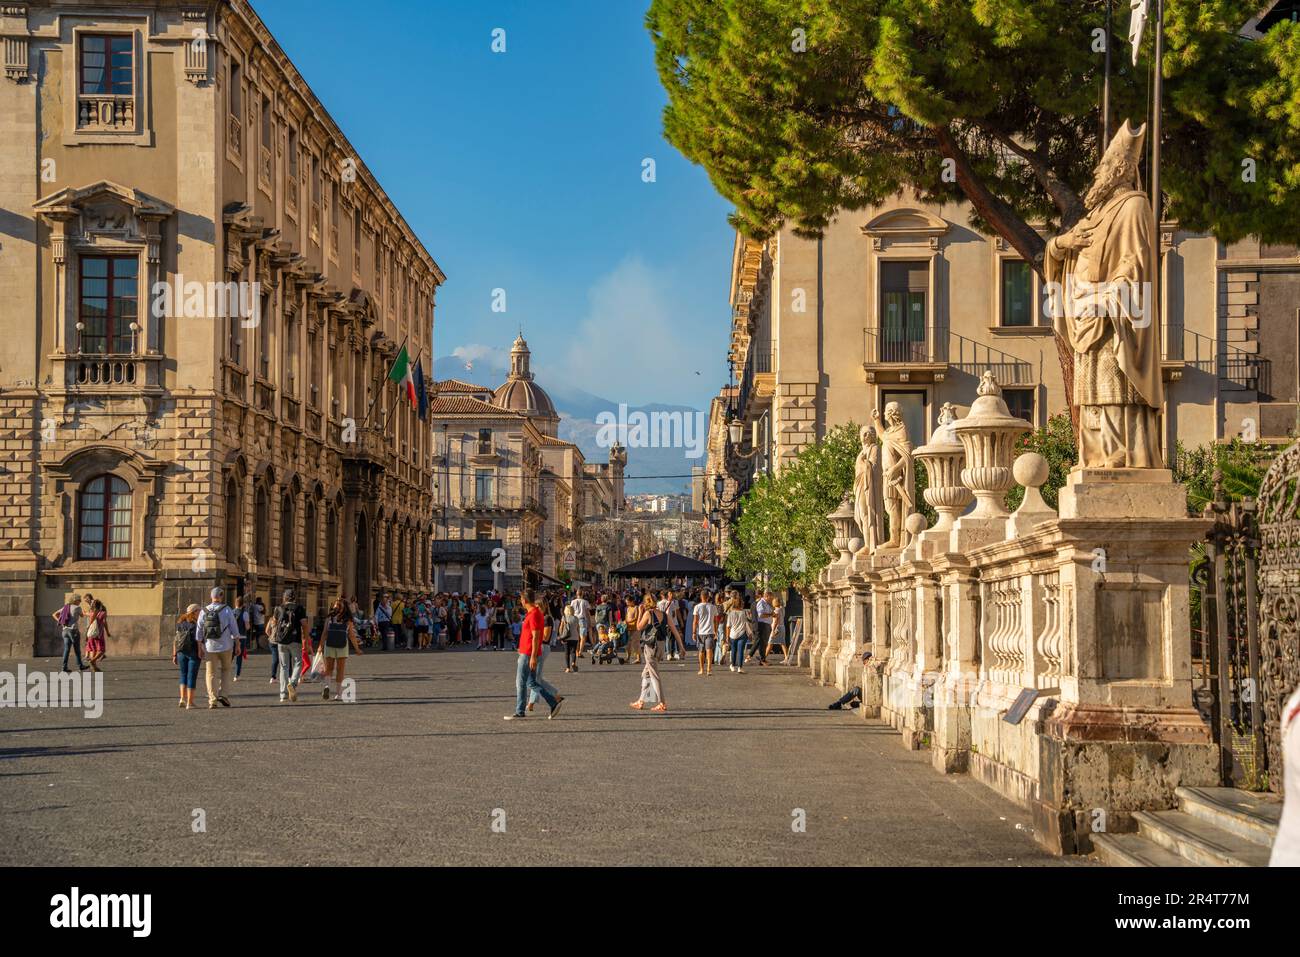 View of Piazza Duomo and Mount Etna in the background, Catania, Sicily, Italy, Europe Stock Photo